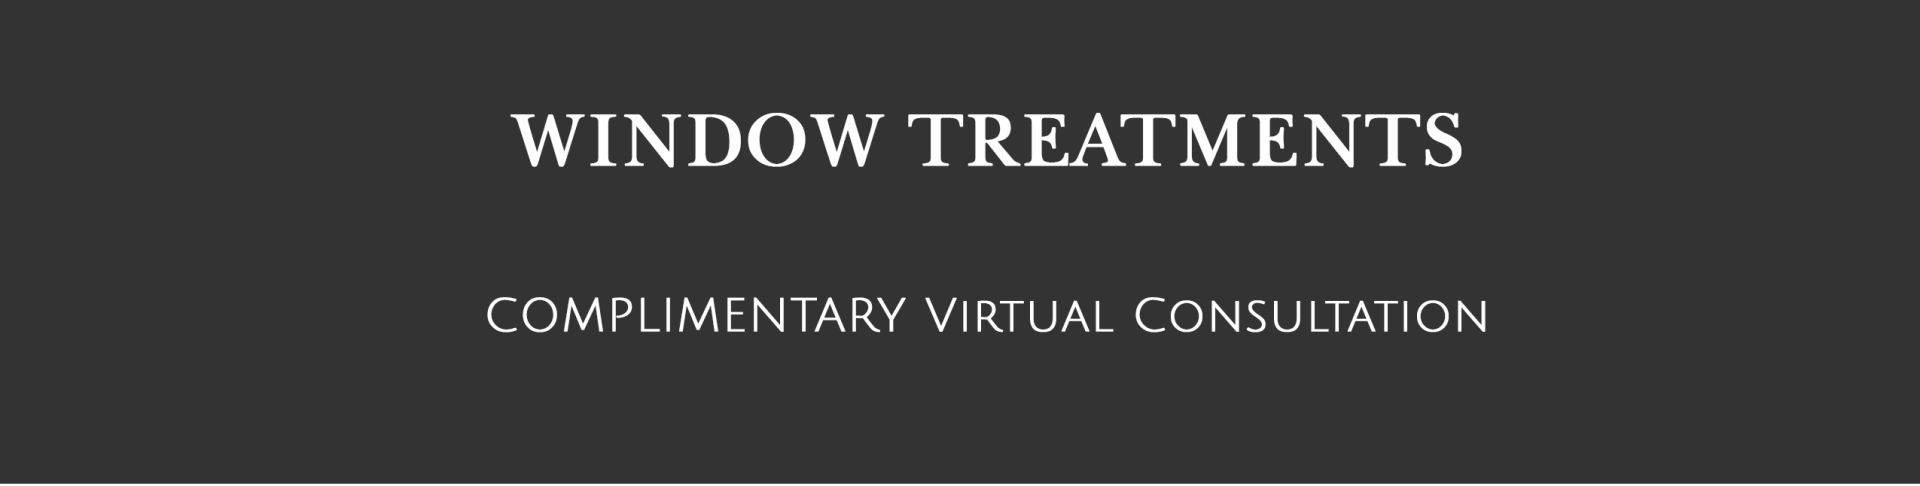 Window treatments and complimentary virtual consultation on gray